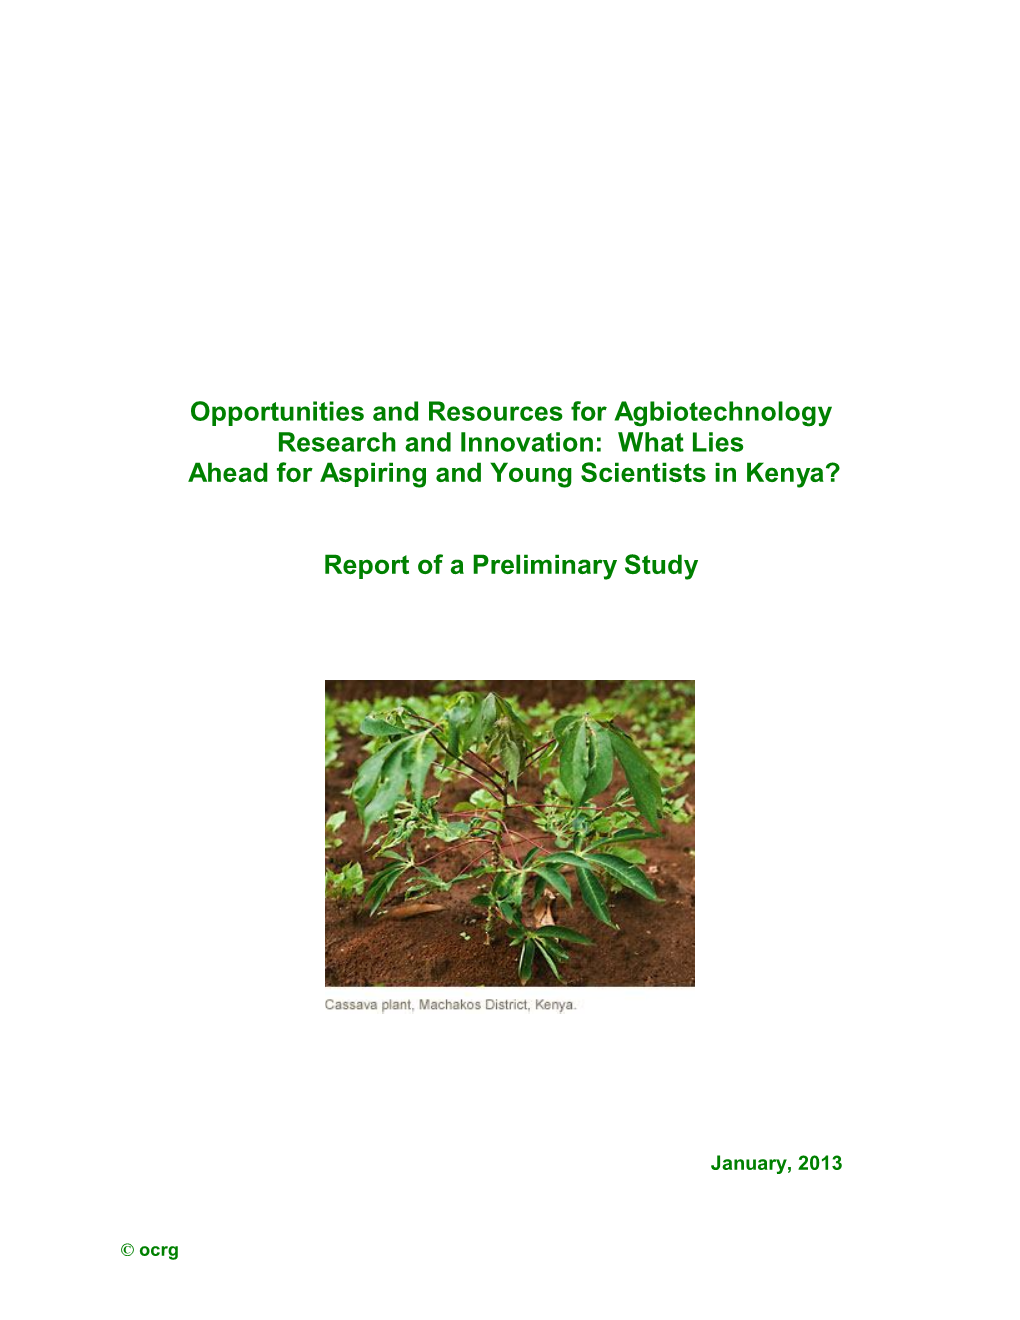 Opportunities and Resources for Agbiotechnology Research and Innovation: What Lies Ahead for Aspiring and Young Scientists in Kenya?